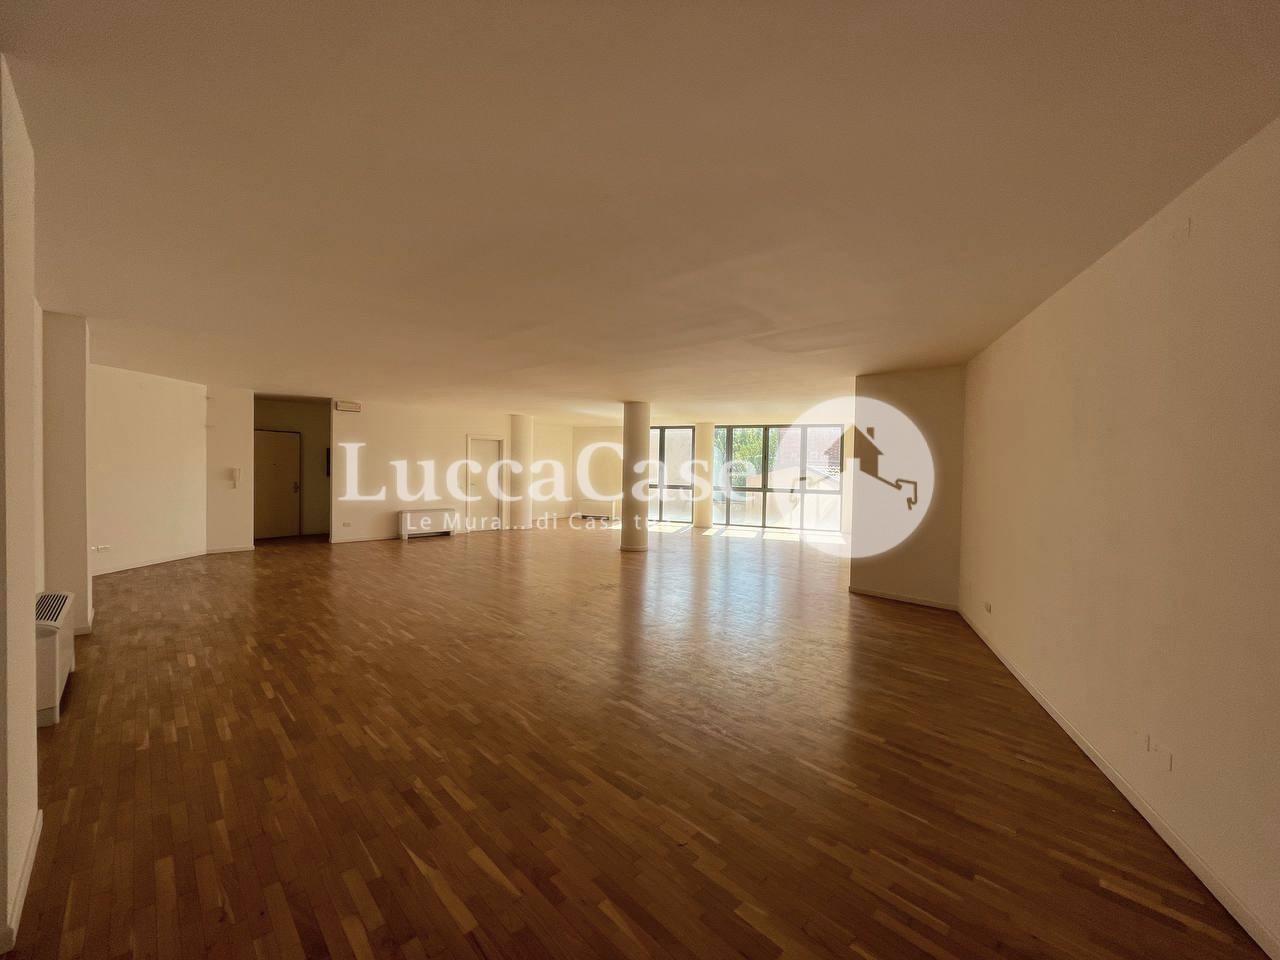 Office for commercial rentals in Lucca